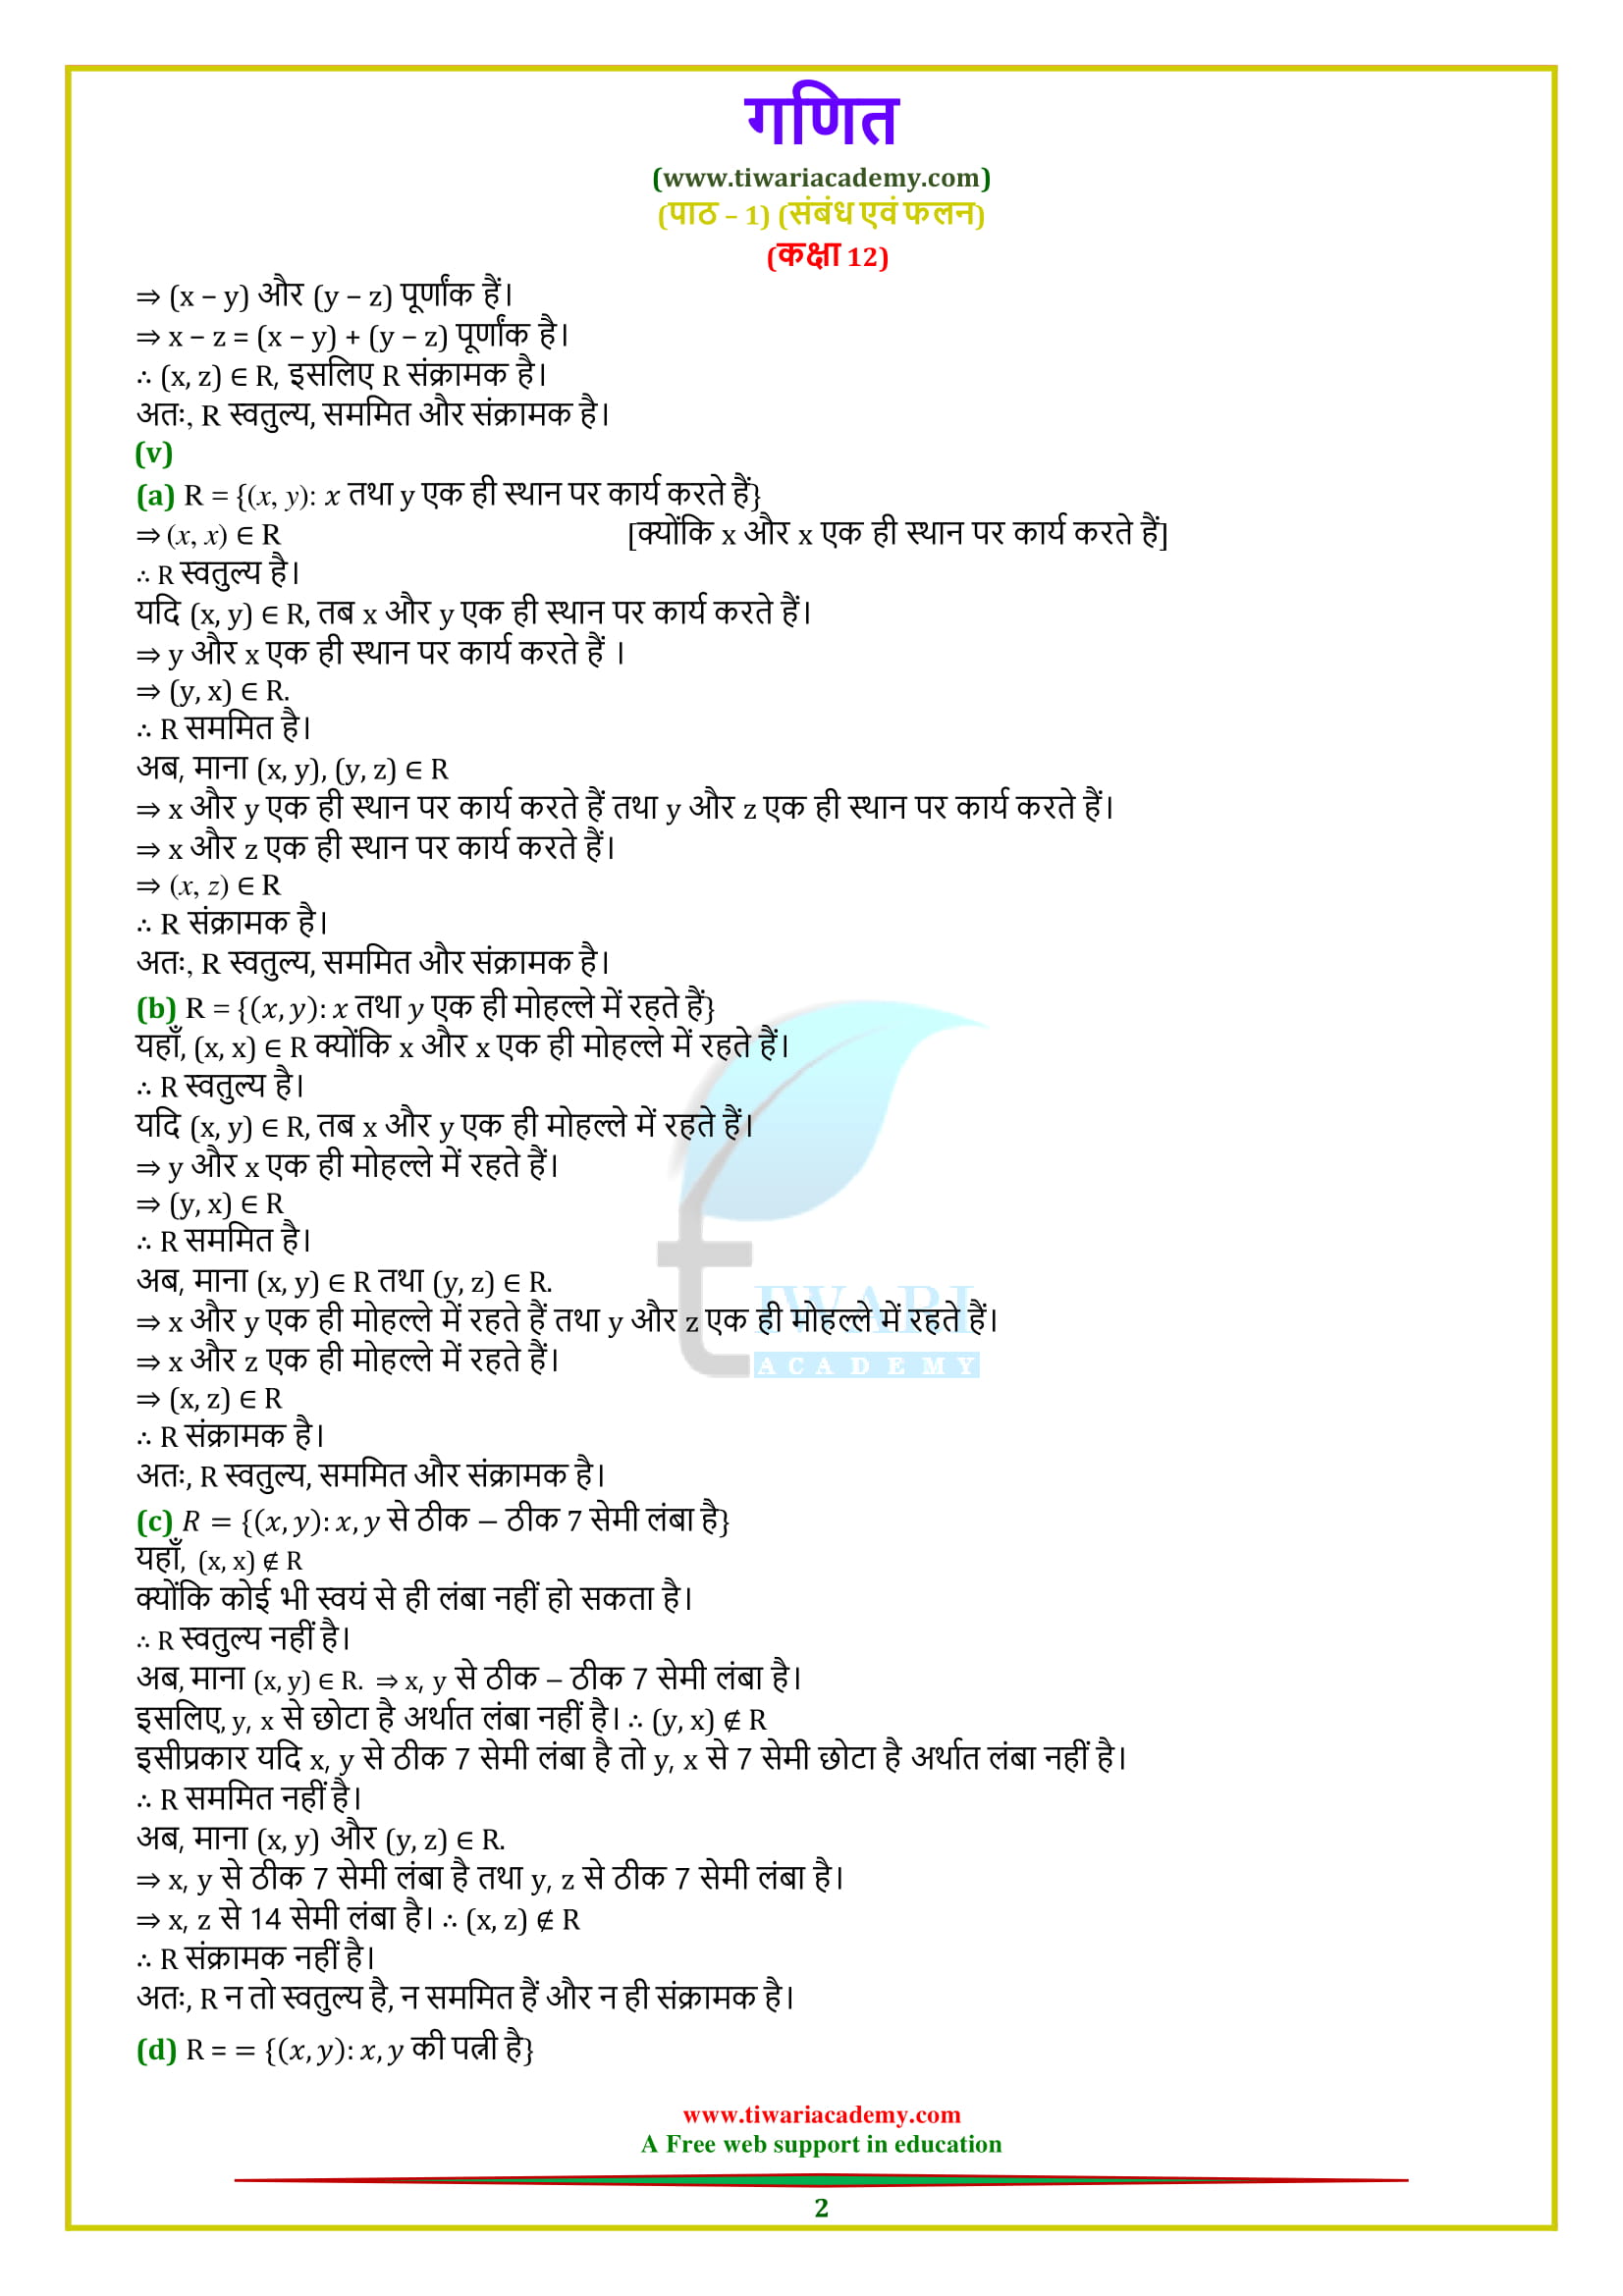 Class 12 Maths Chapter 1 Exercise 1.1 solutions in Hindi medium for CBSE and UP Board.